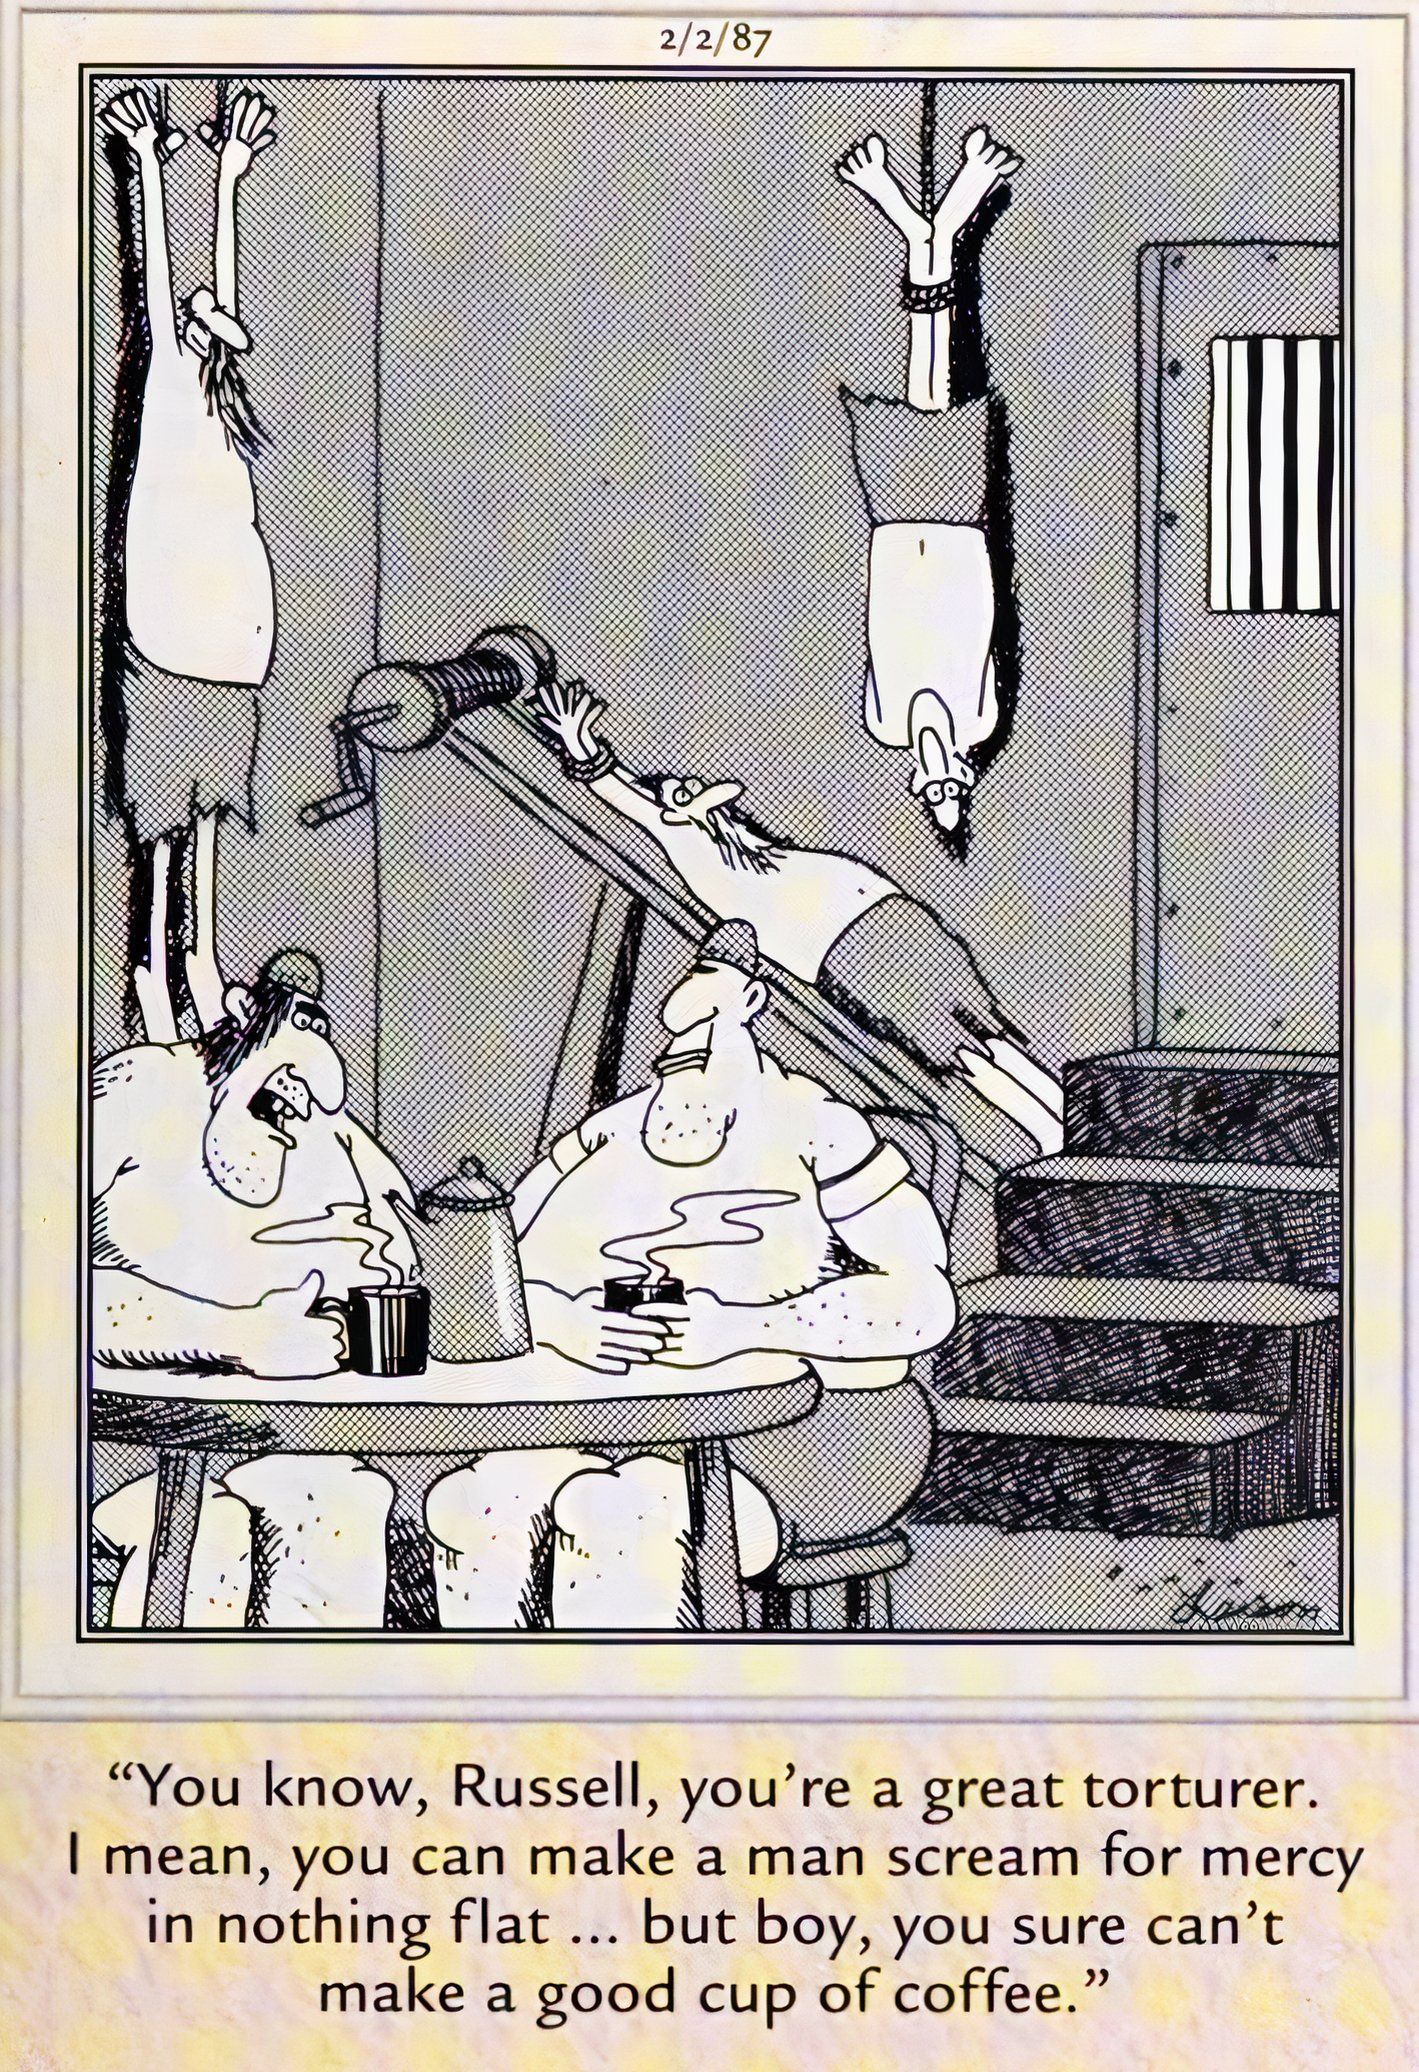 Far Side, two torturers sit and have coffee while their victims are stretched out on the rack & walls behind them.